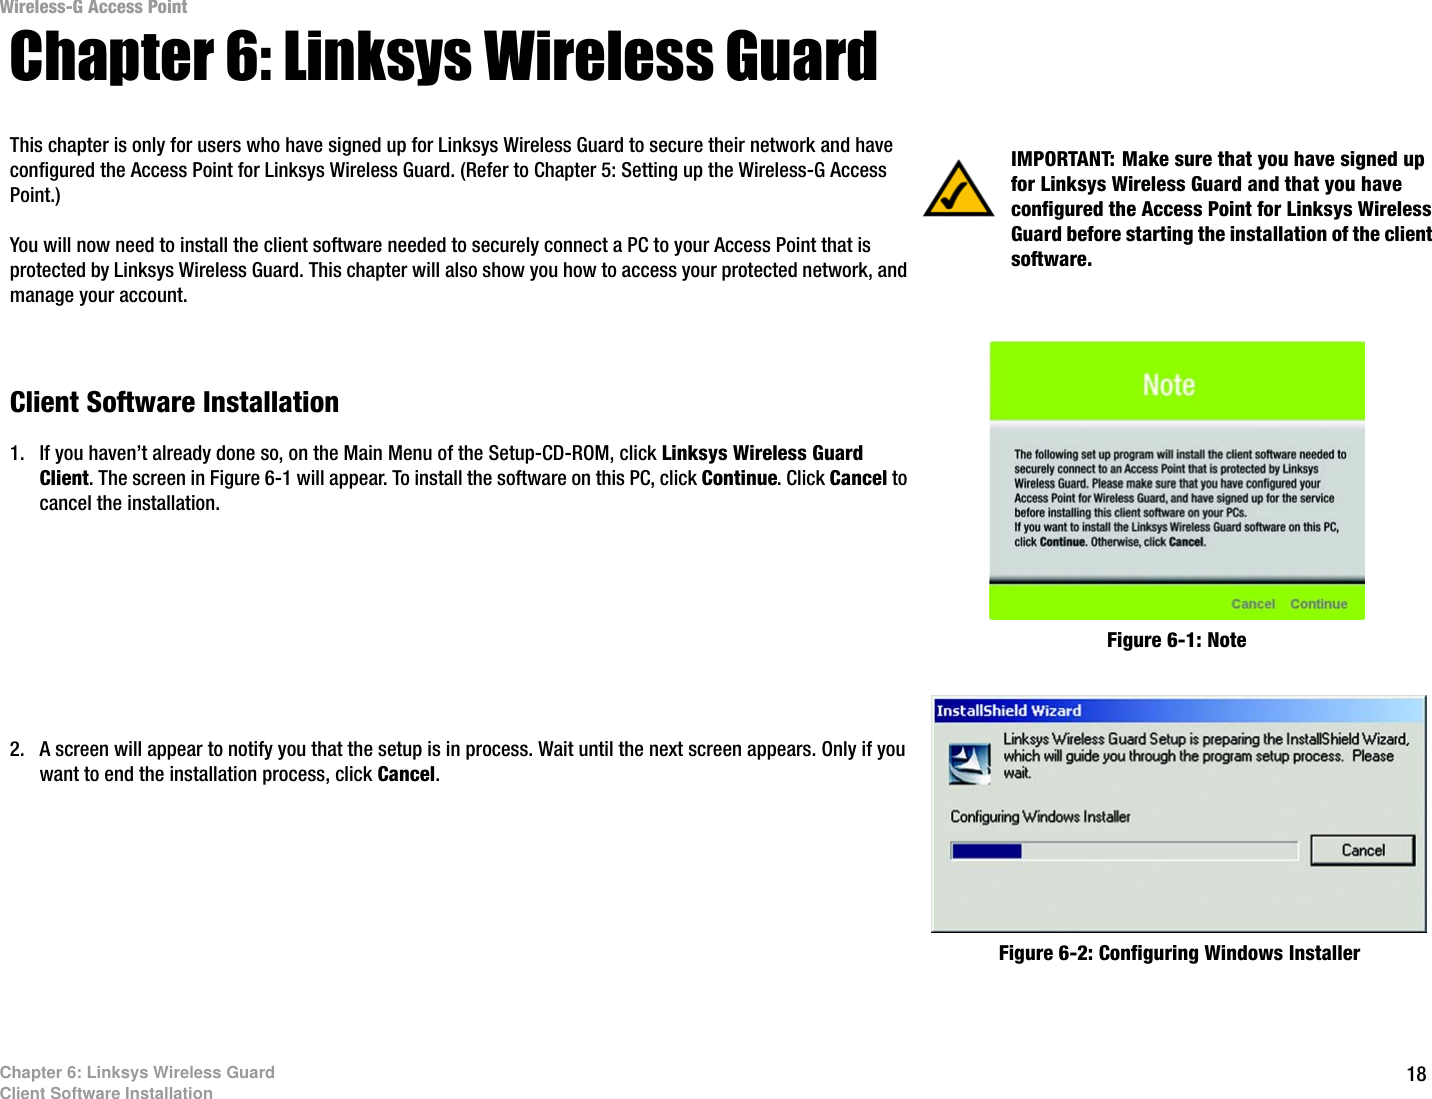 18Chapter 6: Linksys Wireless GuardClient Software InstallationWireless-G Access PointChapter 6: Linksys Wireless GuardThis chapter is only for users who have signed up for Linksys Wireless Guard to secure their network and have configured the Access Point for Linksys Wireless Guard. (Refer to Chapter 5: Setting up the Wireless-G Access Point.) You will now need to install the client software needed to securely connect a PC to your Access Point that is protected by Linksys Wireless Guard. This chapter will also show you how to access your protected network, and manage your account.Client Software Installation1. If you haven’t already done so, on the Main Menu of the Setup-CD-ROM, click Linksys Wireless Guard Client. The screen in Figure 6-1 will appear. To install the software on this PC, click Continue. Click Cancel to cancel the installation.2. A screen will appear to notify you that the setup is in process. Wait until the next screen appears. Only if you want to end the installation process, click Cancel. Figure 6-1: NoteIMPORTANT: Make sure that you have signed up for Linksys Wireless Guard and that you have configured the Access Point for Linksys Wireless Guard before starting the installation of the client software.Figure 6-2: Configuring Windows Installer